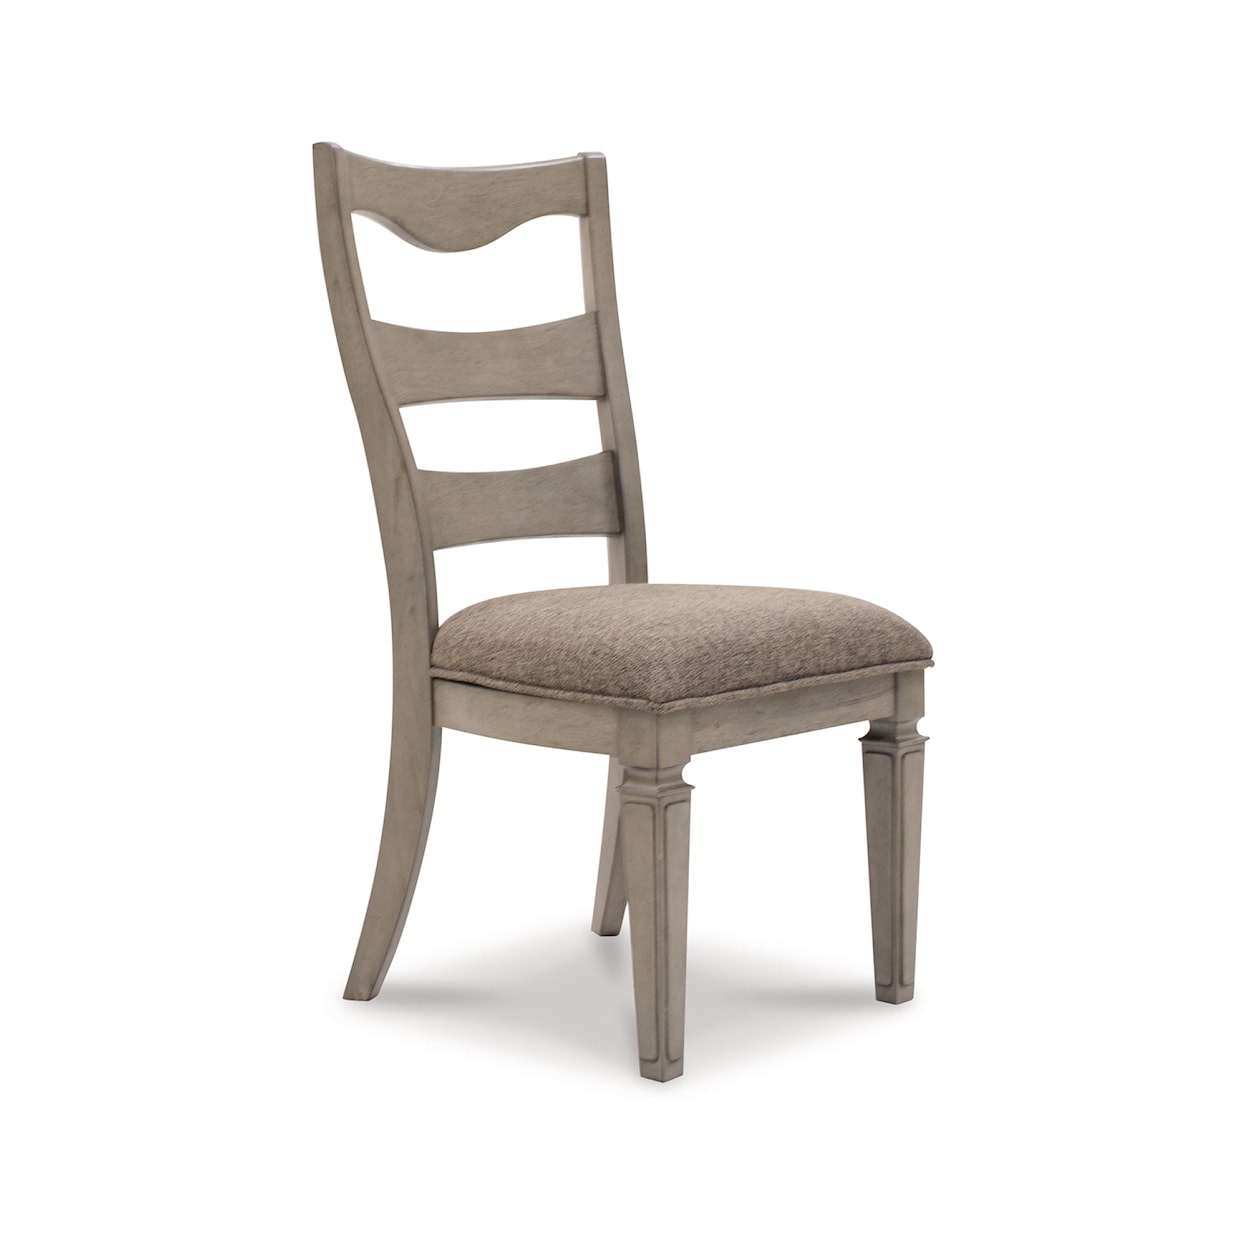 Signature Design by Ashley Furniture Lexorne Dining Chair